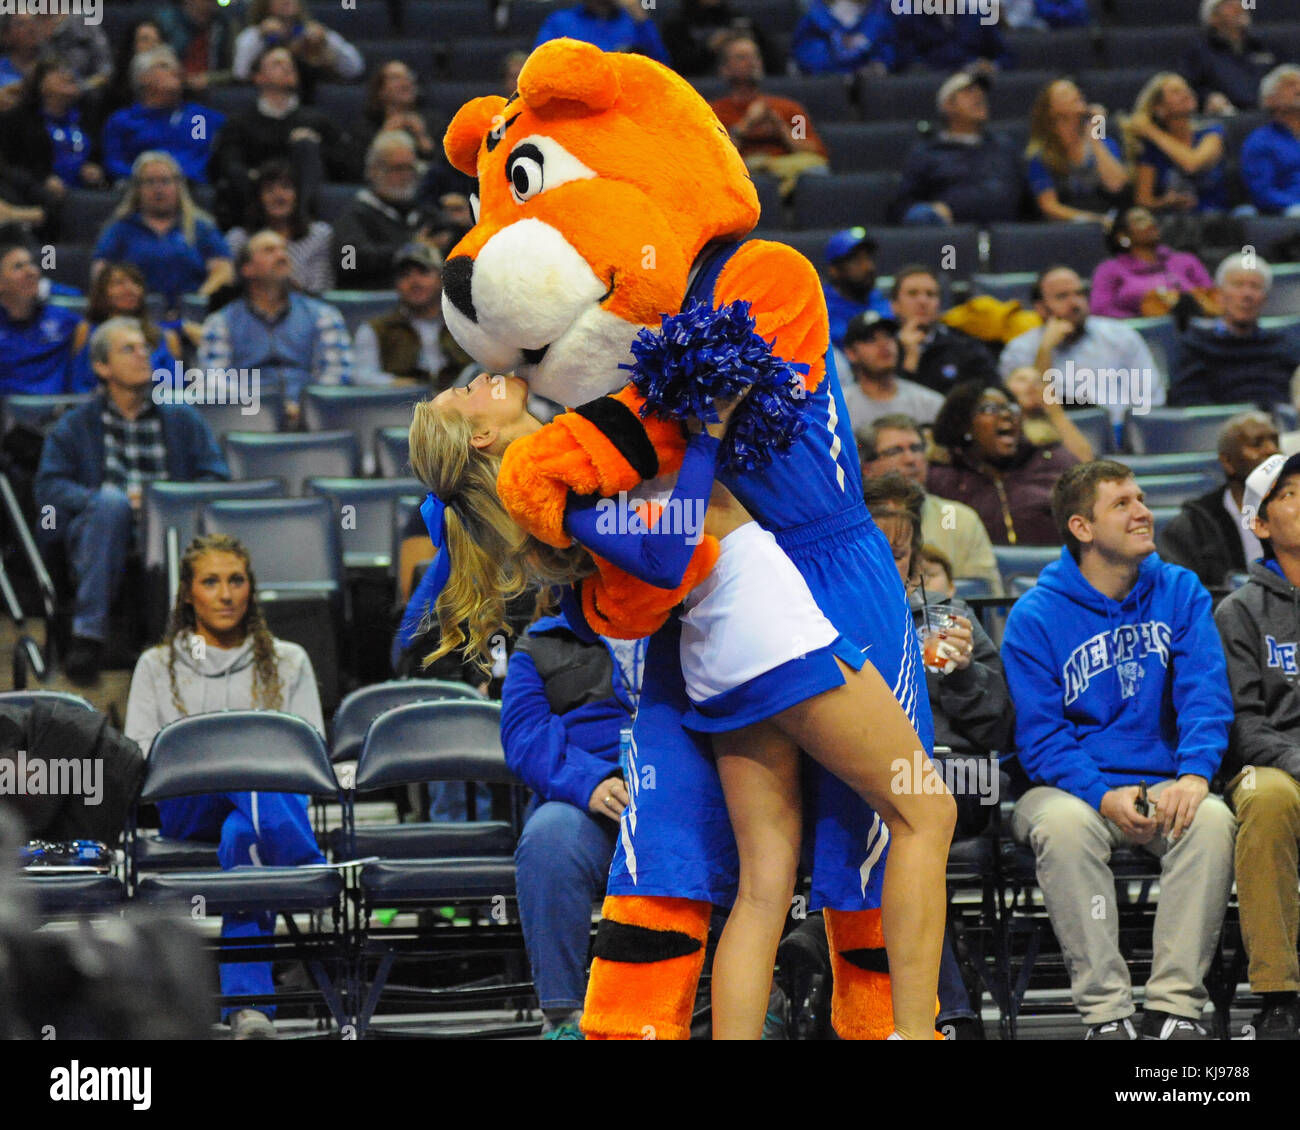 Pouncer Participating in the Over The Edge Mascot Challenge - University of  Memphis Athletics